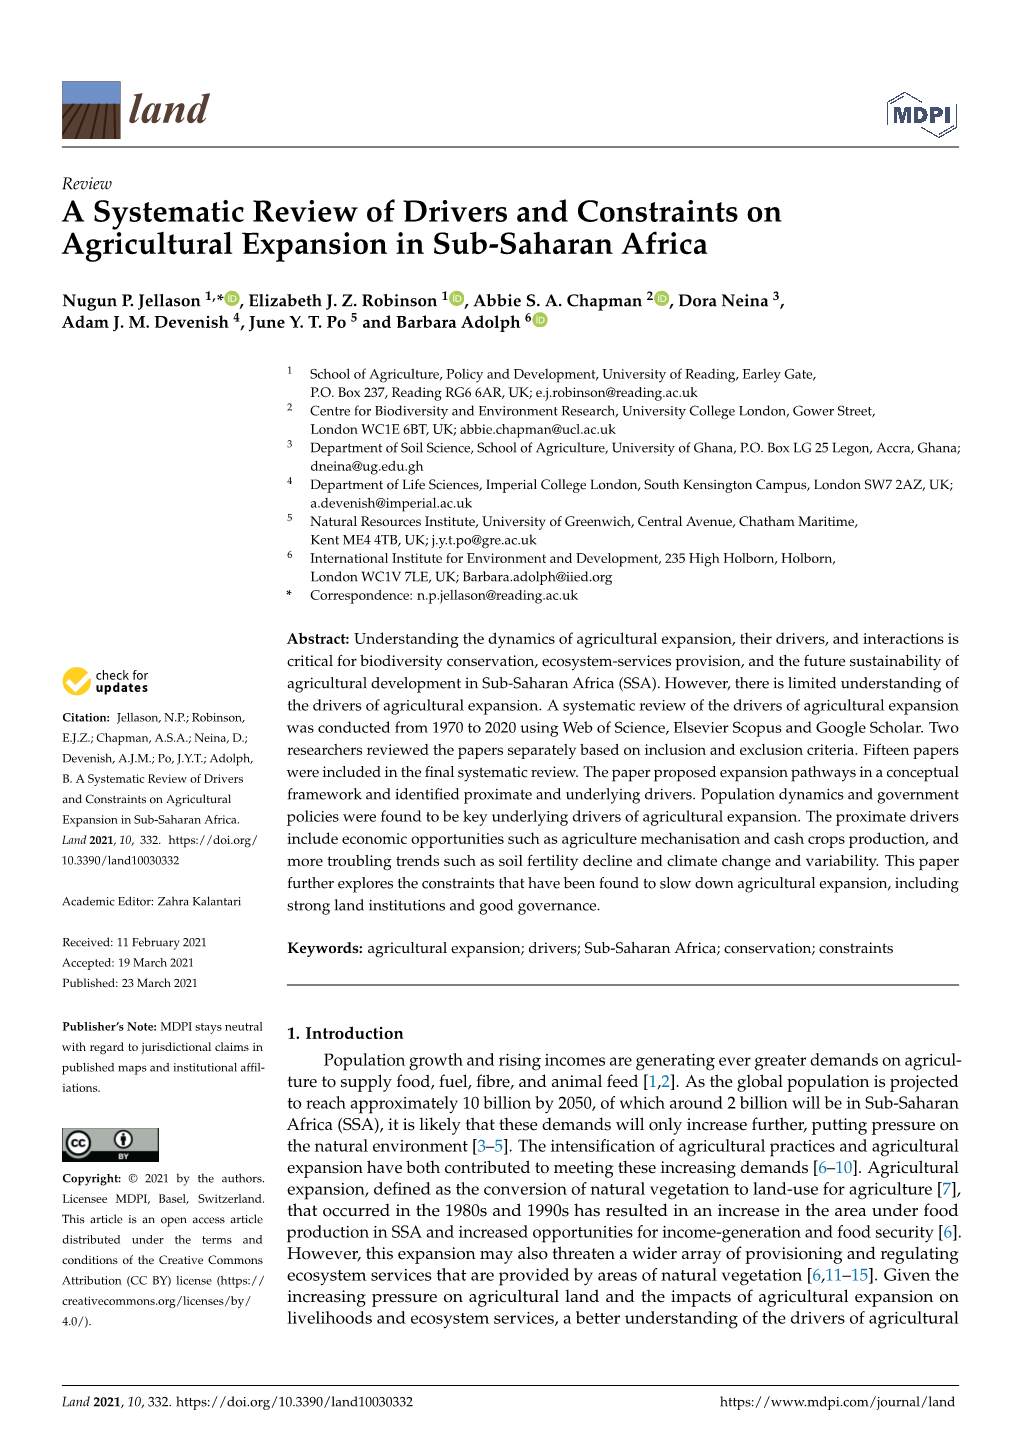 A Systematic Review of Drivers and Constraints on Agricultural Expansion in Sub-Saharan Africa